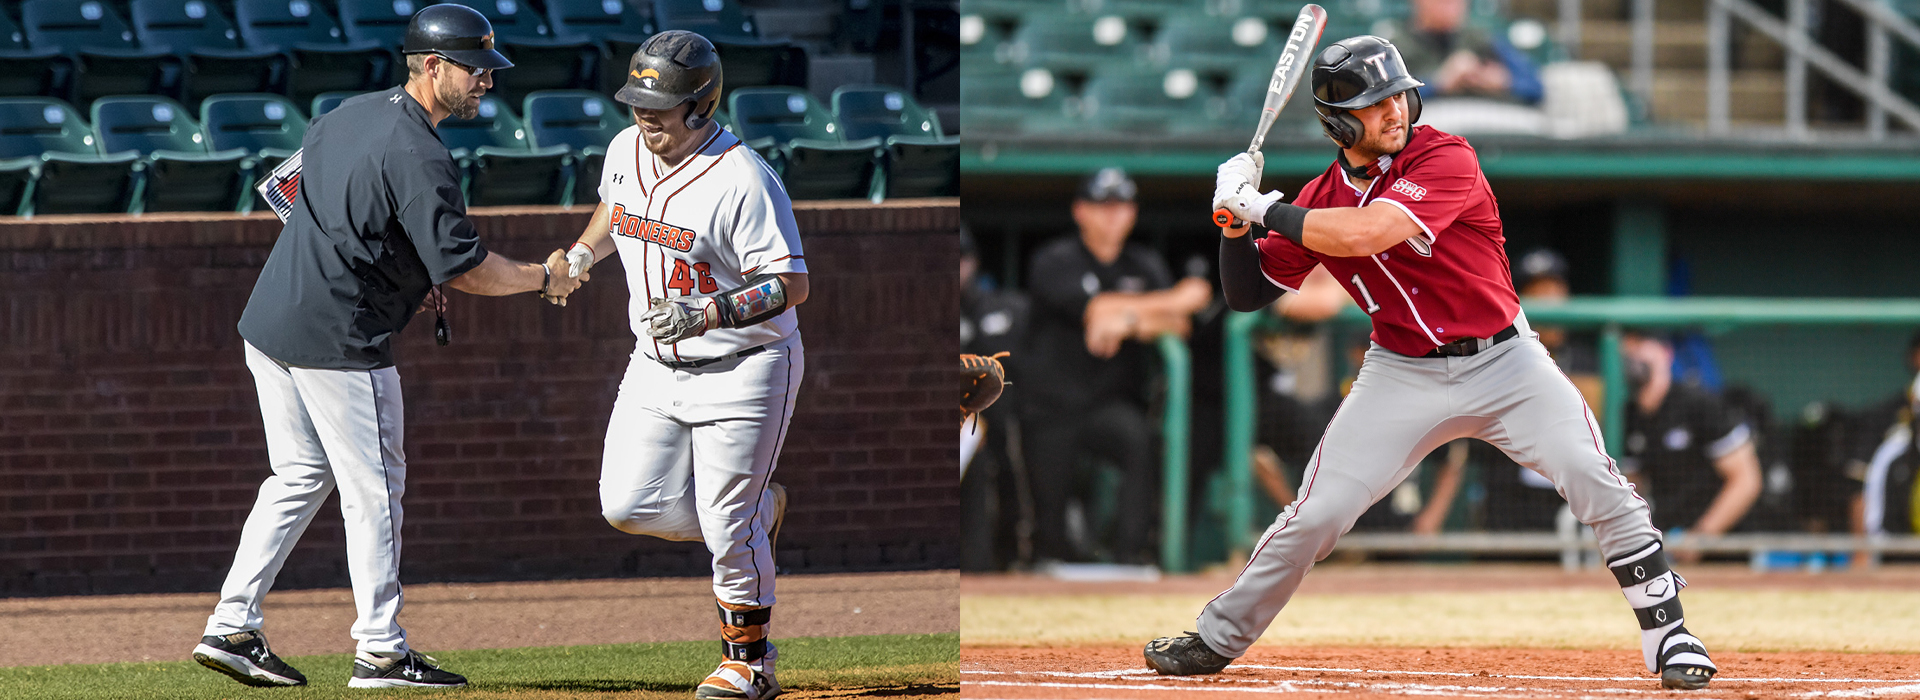 Miller, Frederic added to Tennessee Tech baseball staff